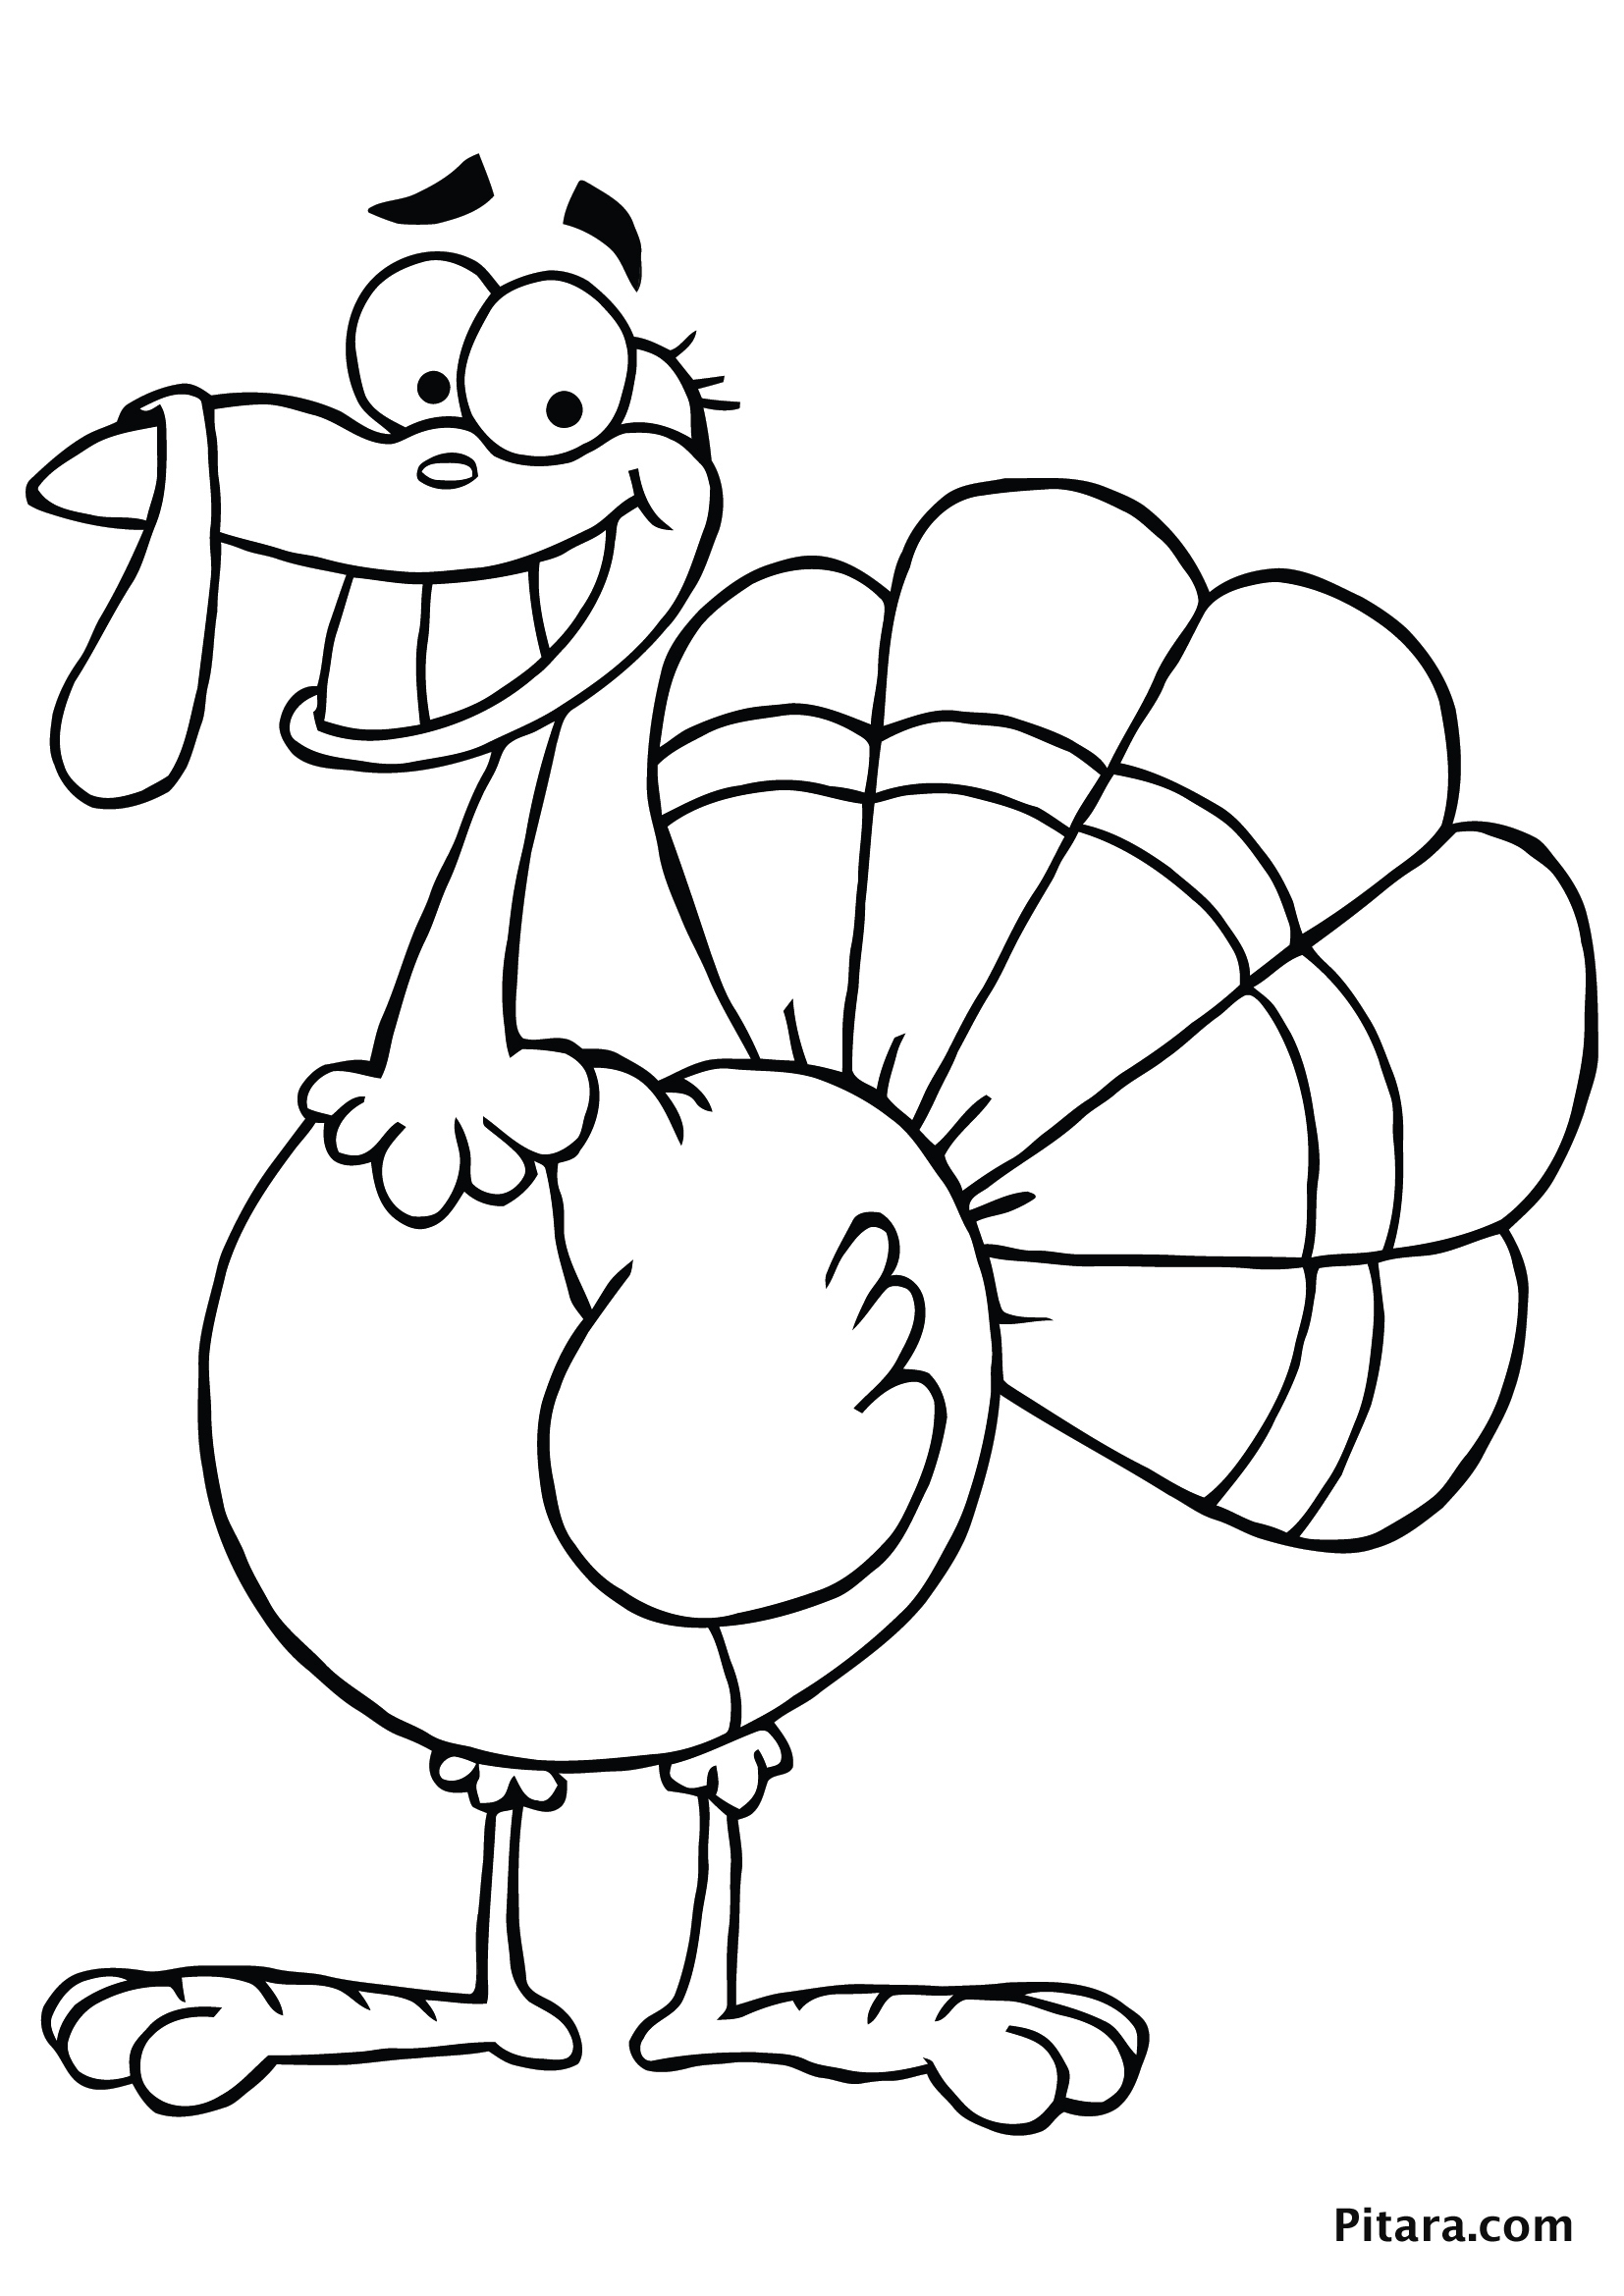 Download Turkey Coloring Pages for Kids | Pitara Kids Network